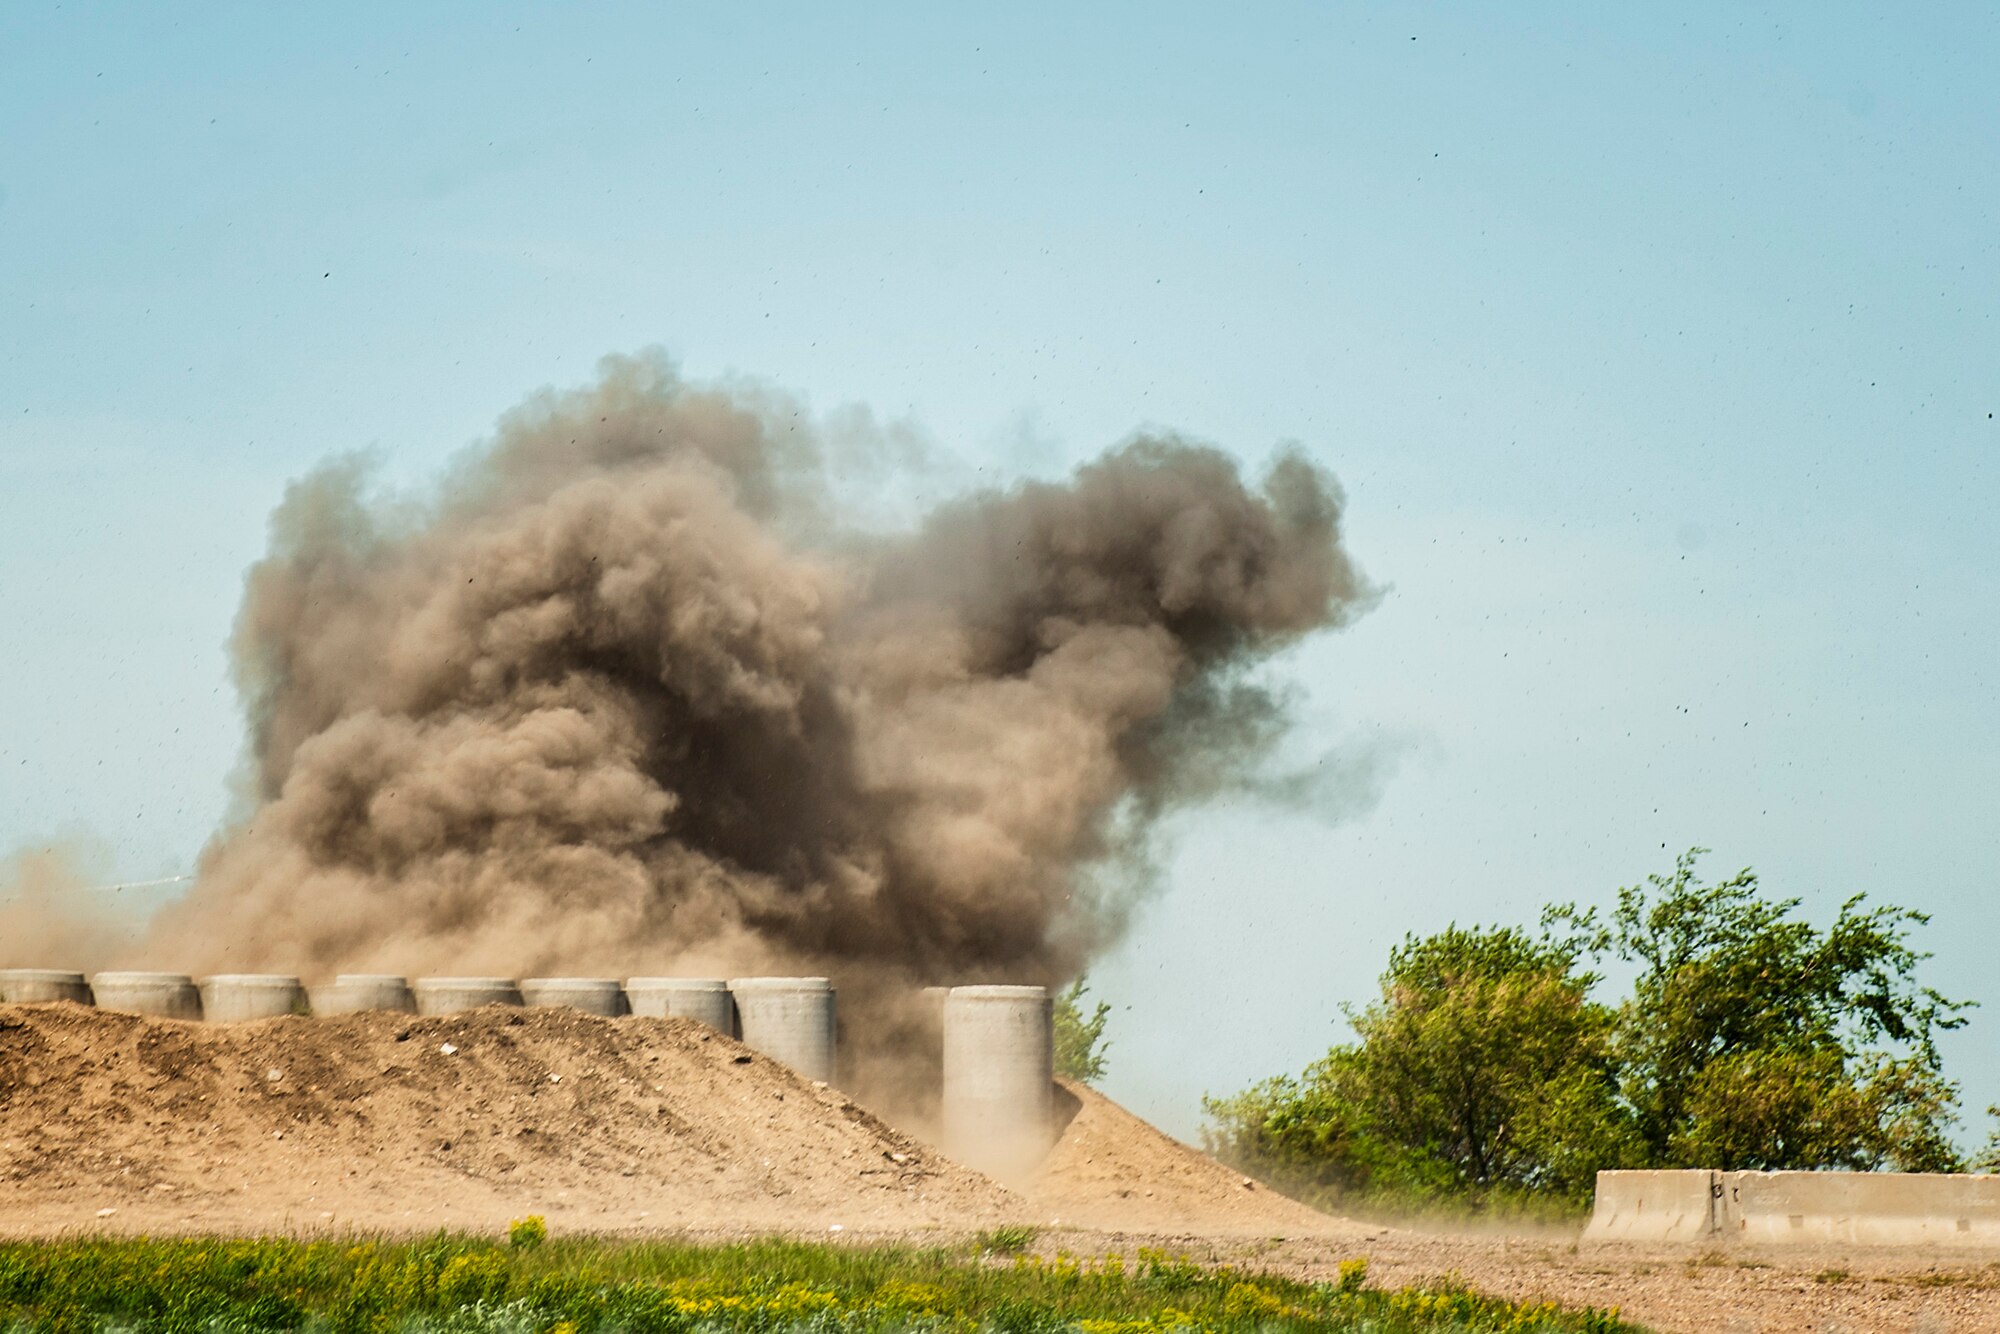 Smoke and dirt fly through the air after a controlled blast during an Expeditionary Training Day at Minot Air Force Base, N.D., June 1, 2017. The training included searching for and identifying simulated explosive ordinance to help prepare 5th Civil Engineer Squadron Airmen for future deployments. (U.S. Air Force photo/Senior Airman J.T. Armstrong)